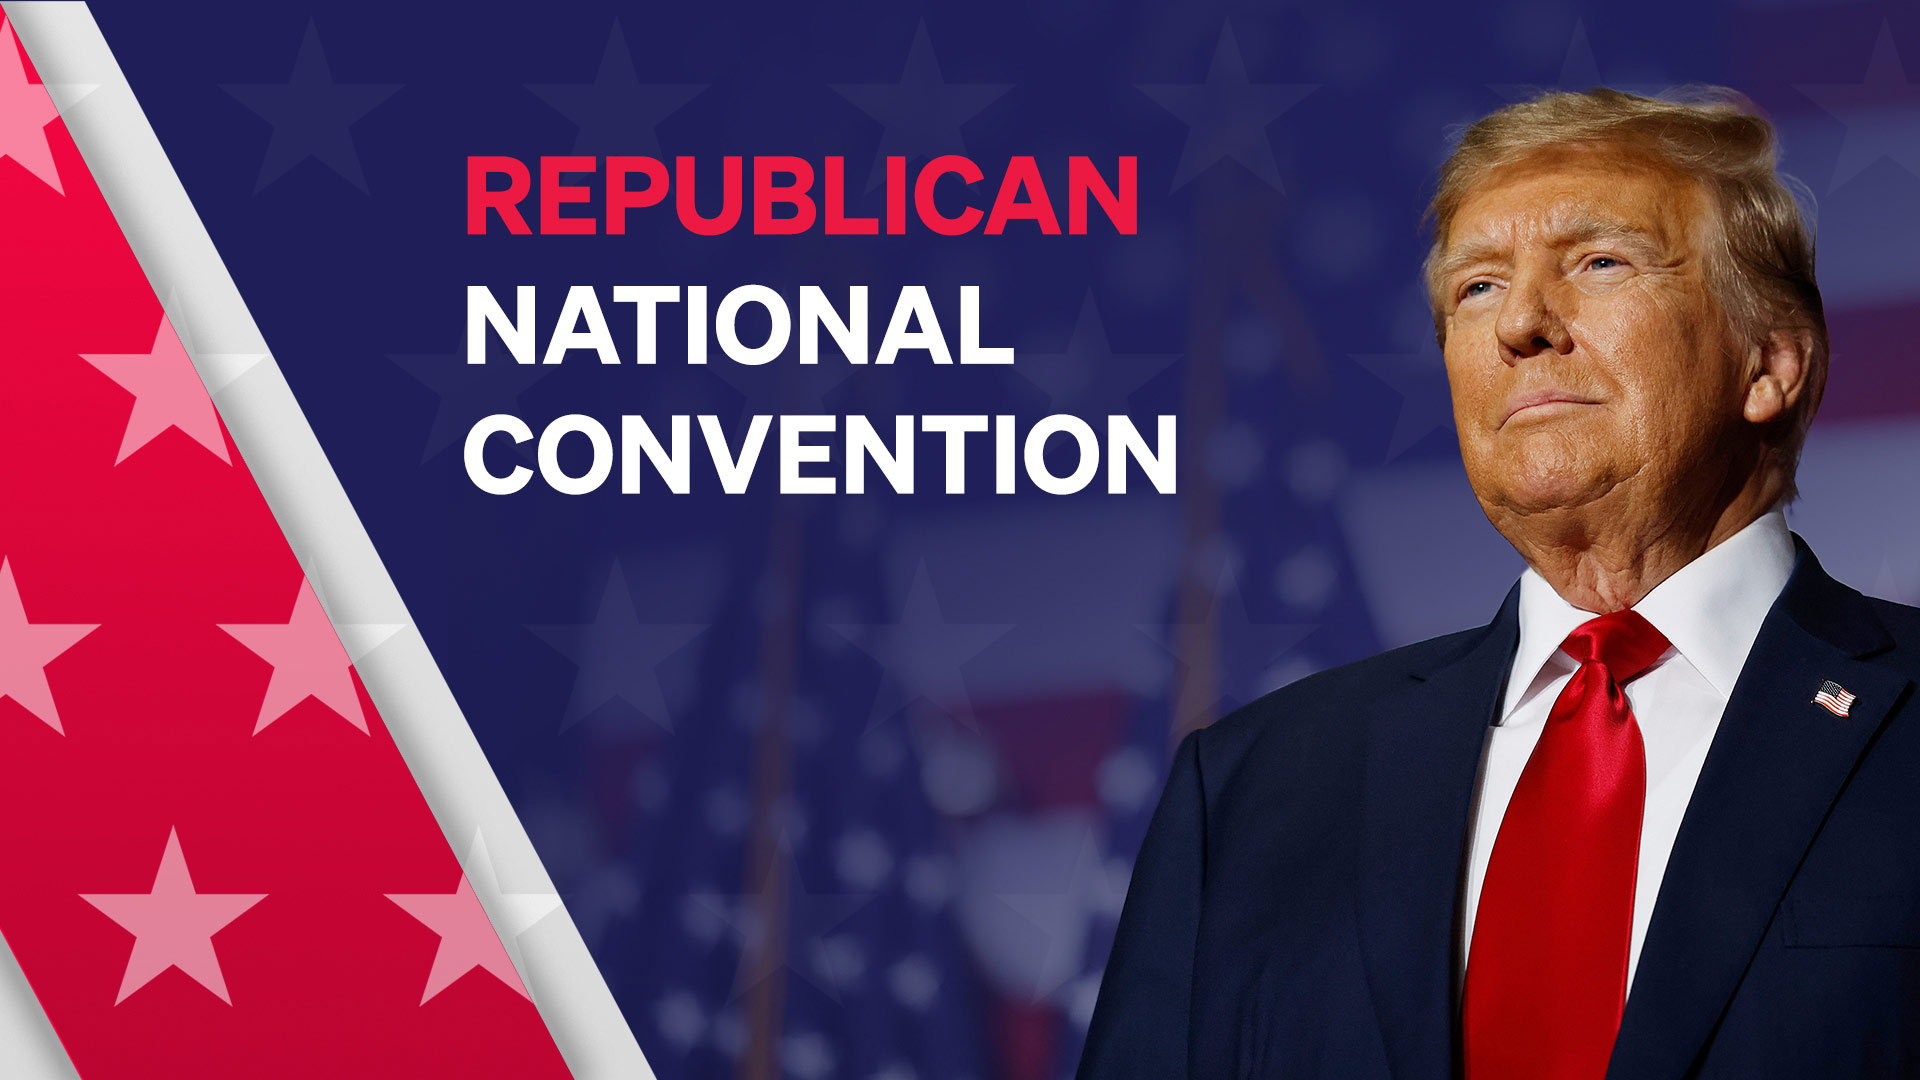 The Republican National Convention kicks off Monday, July 15, in Milwaukee against the backdrop of an apparent assassination attempt against former President Donald Trump this weekend.